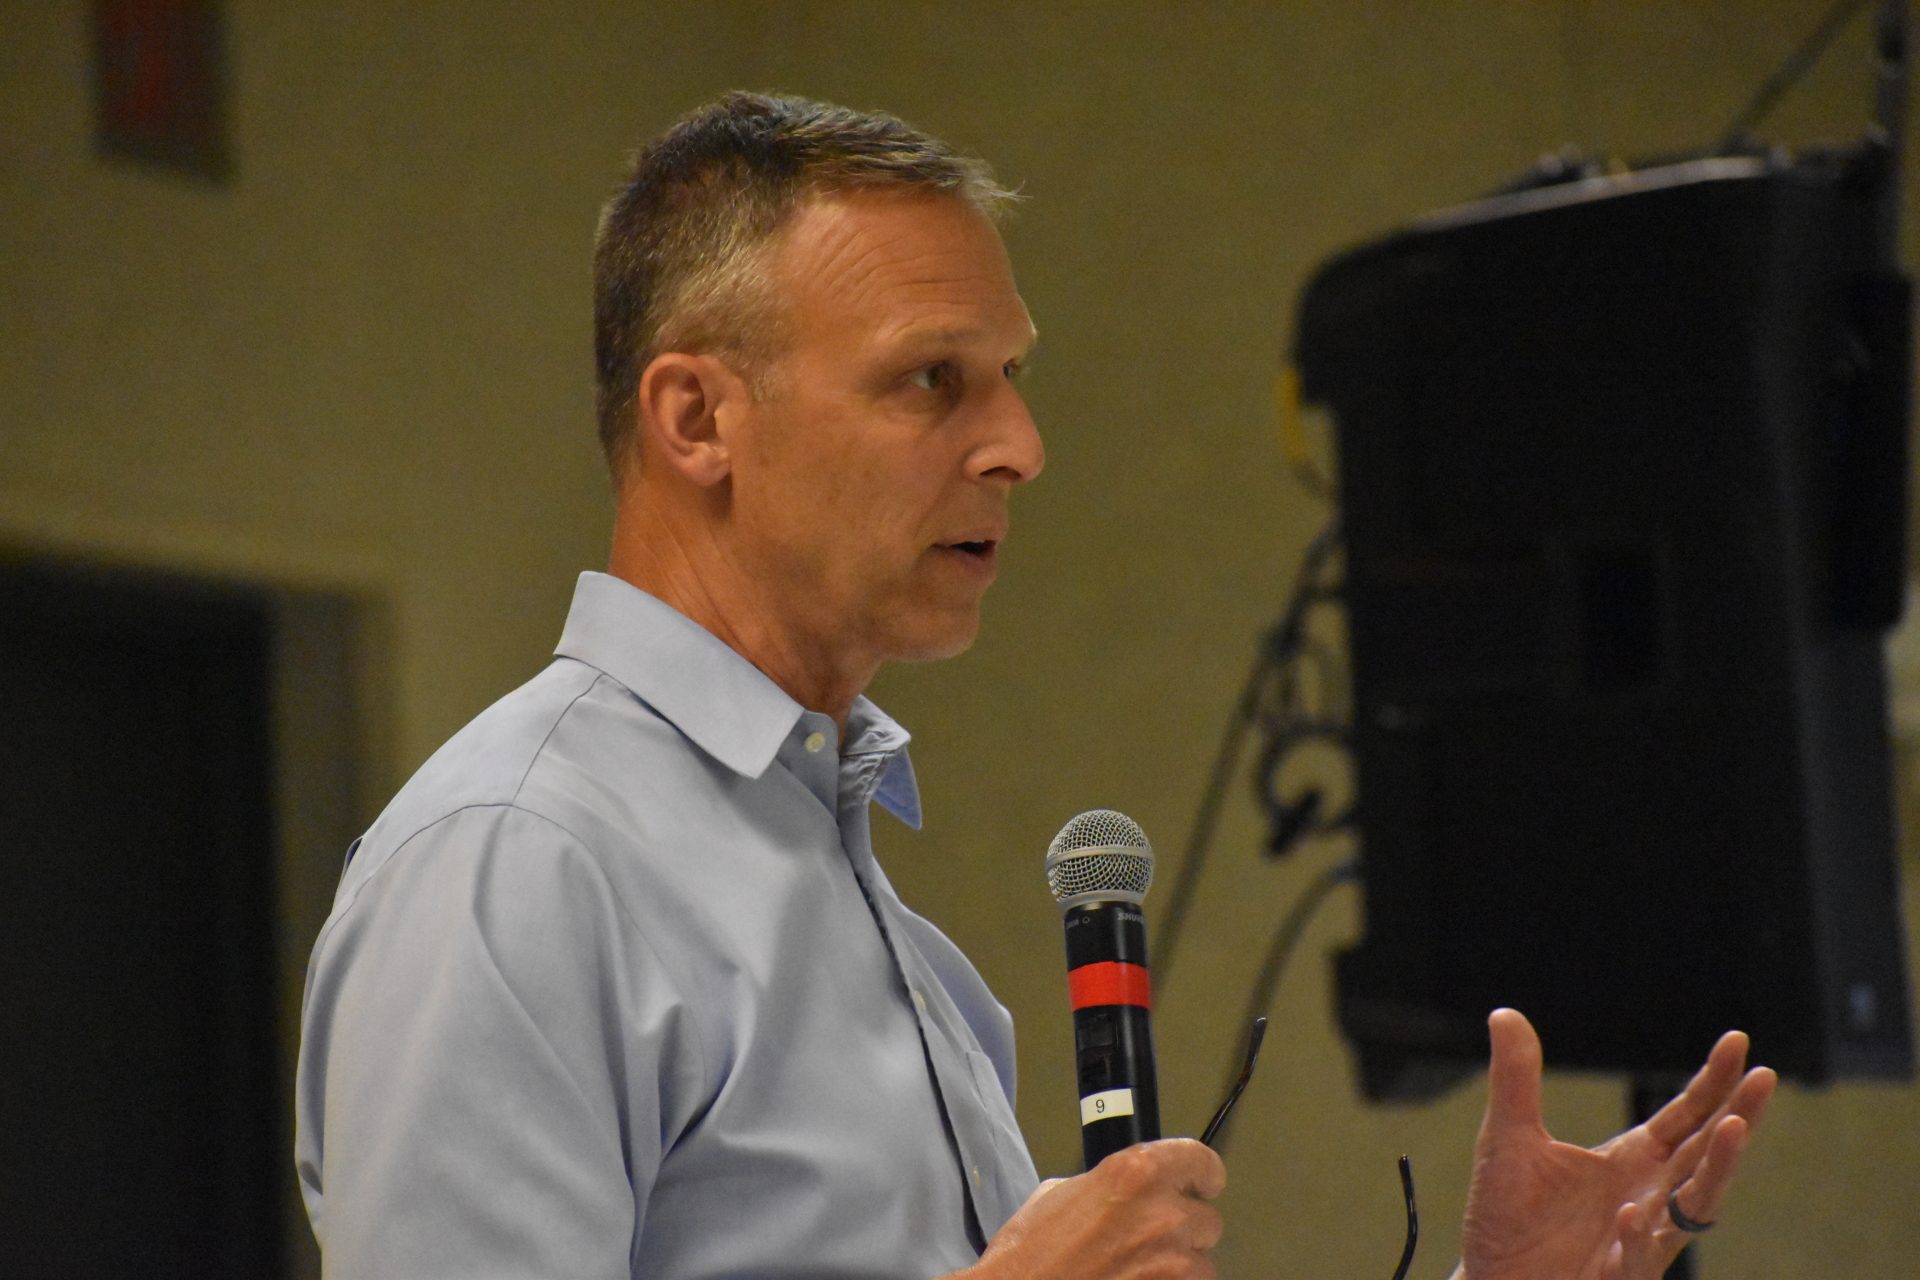 U.S. Rep. Scott Perry, R-Pa., speaks to a crowd during an in-person town hall on July 30, 2019.